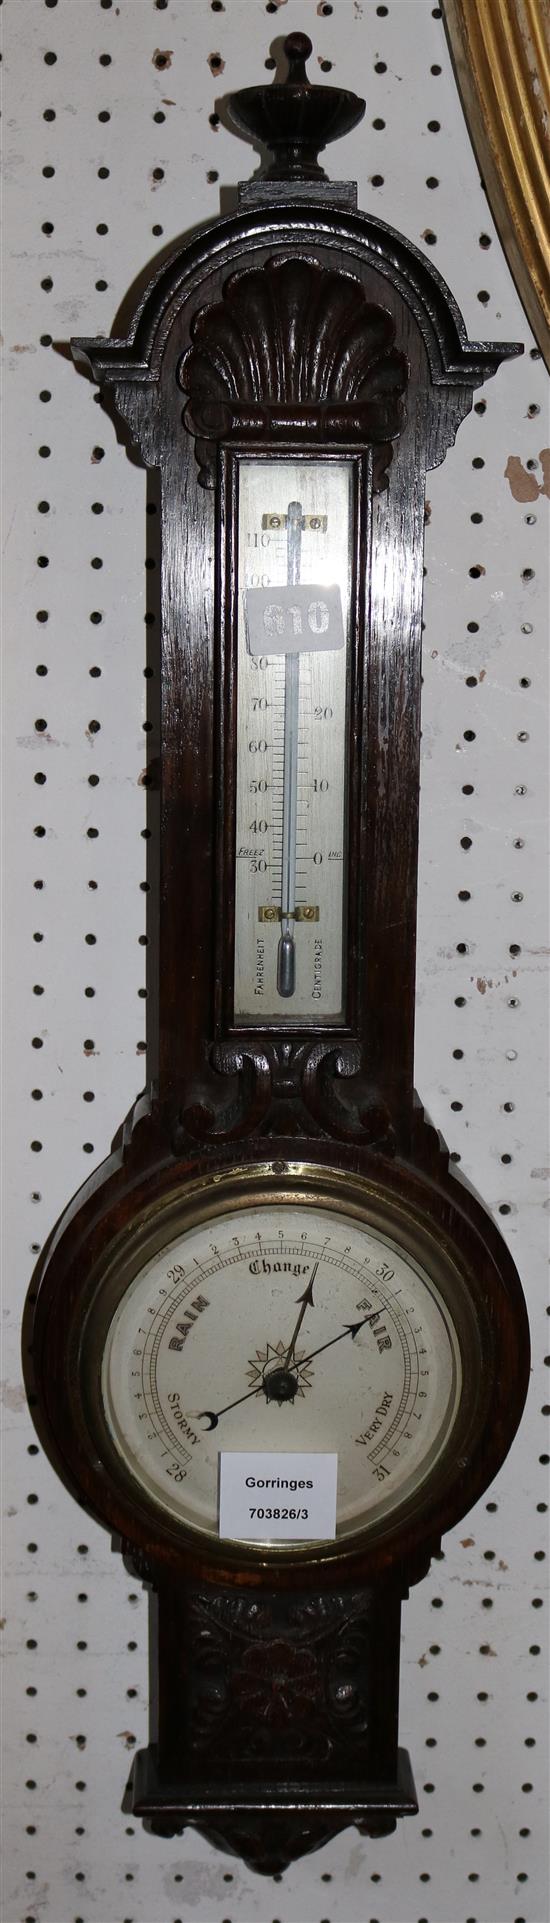 Edwardian carved aneroid barometer and thermometer